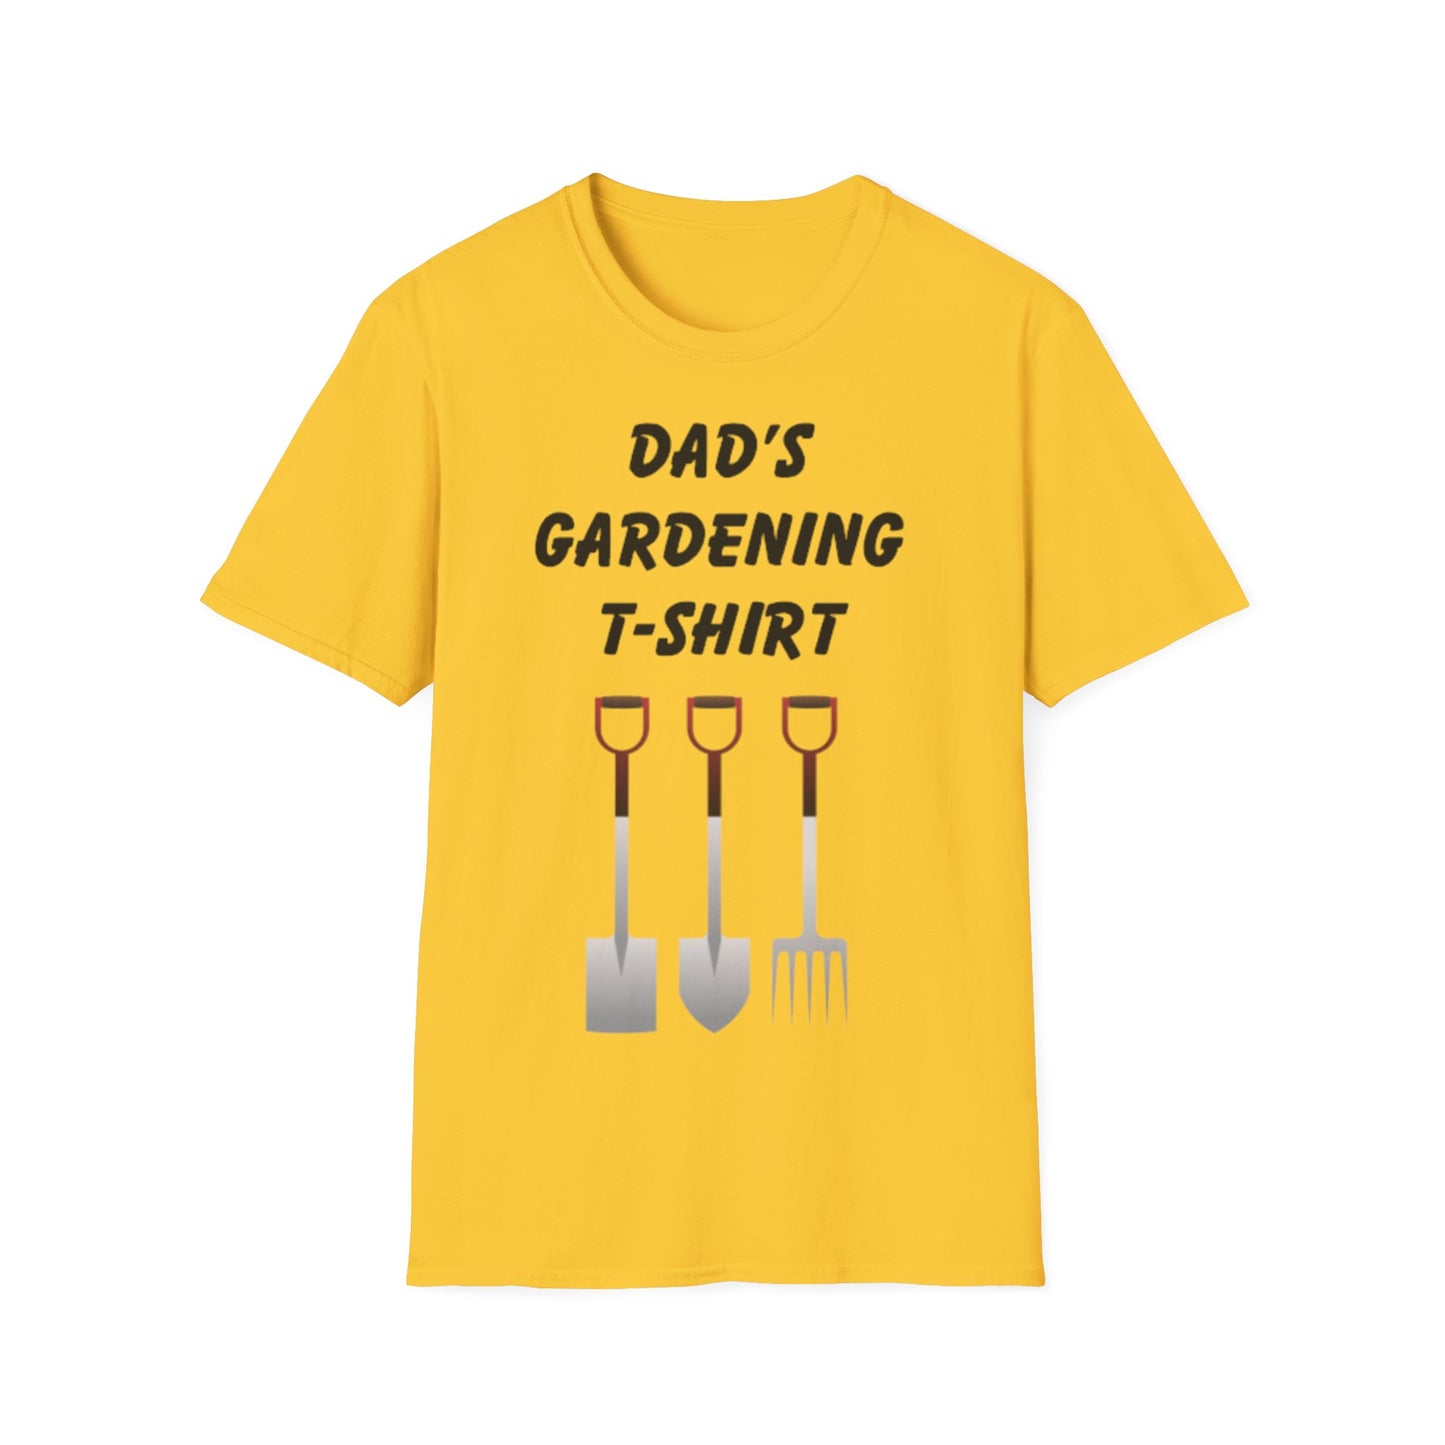 Dad's Gardening T-shirt Father's Day T-Shirt